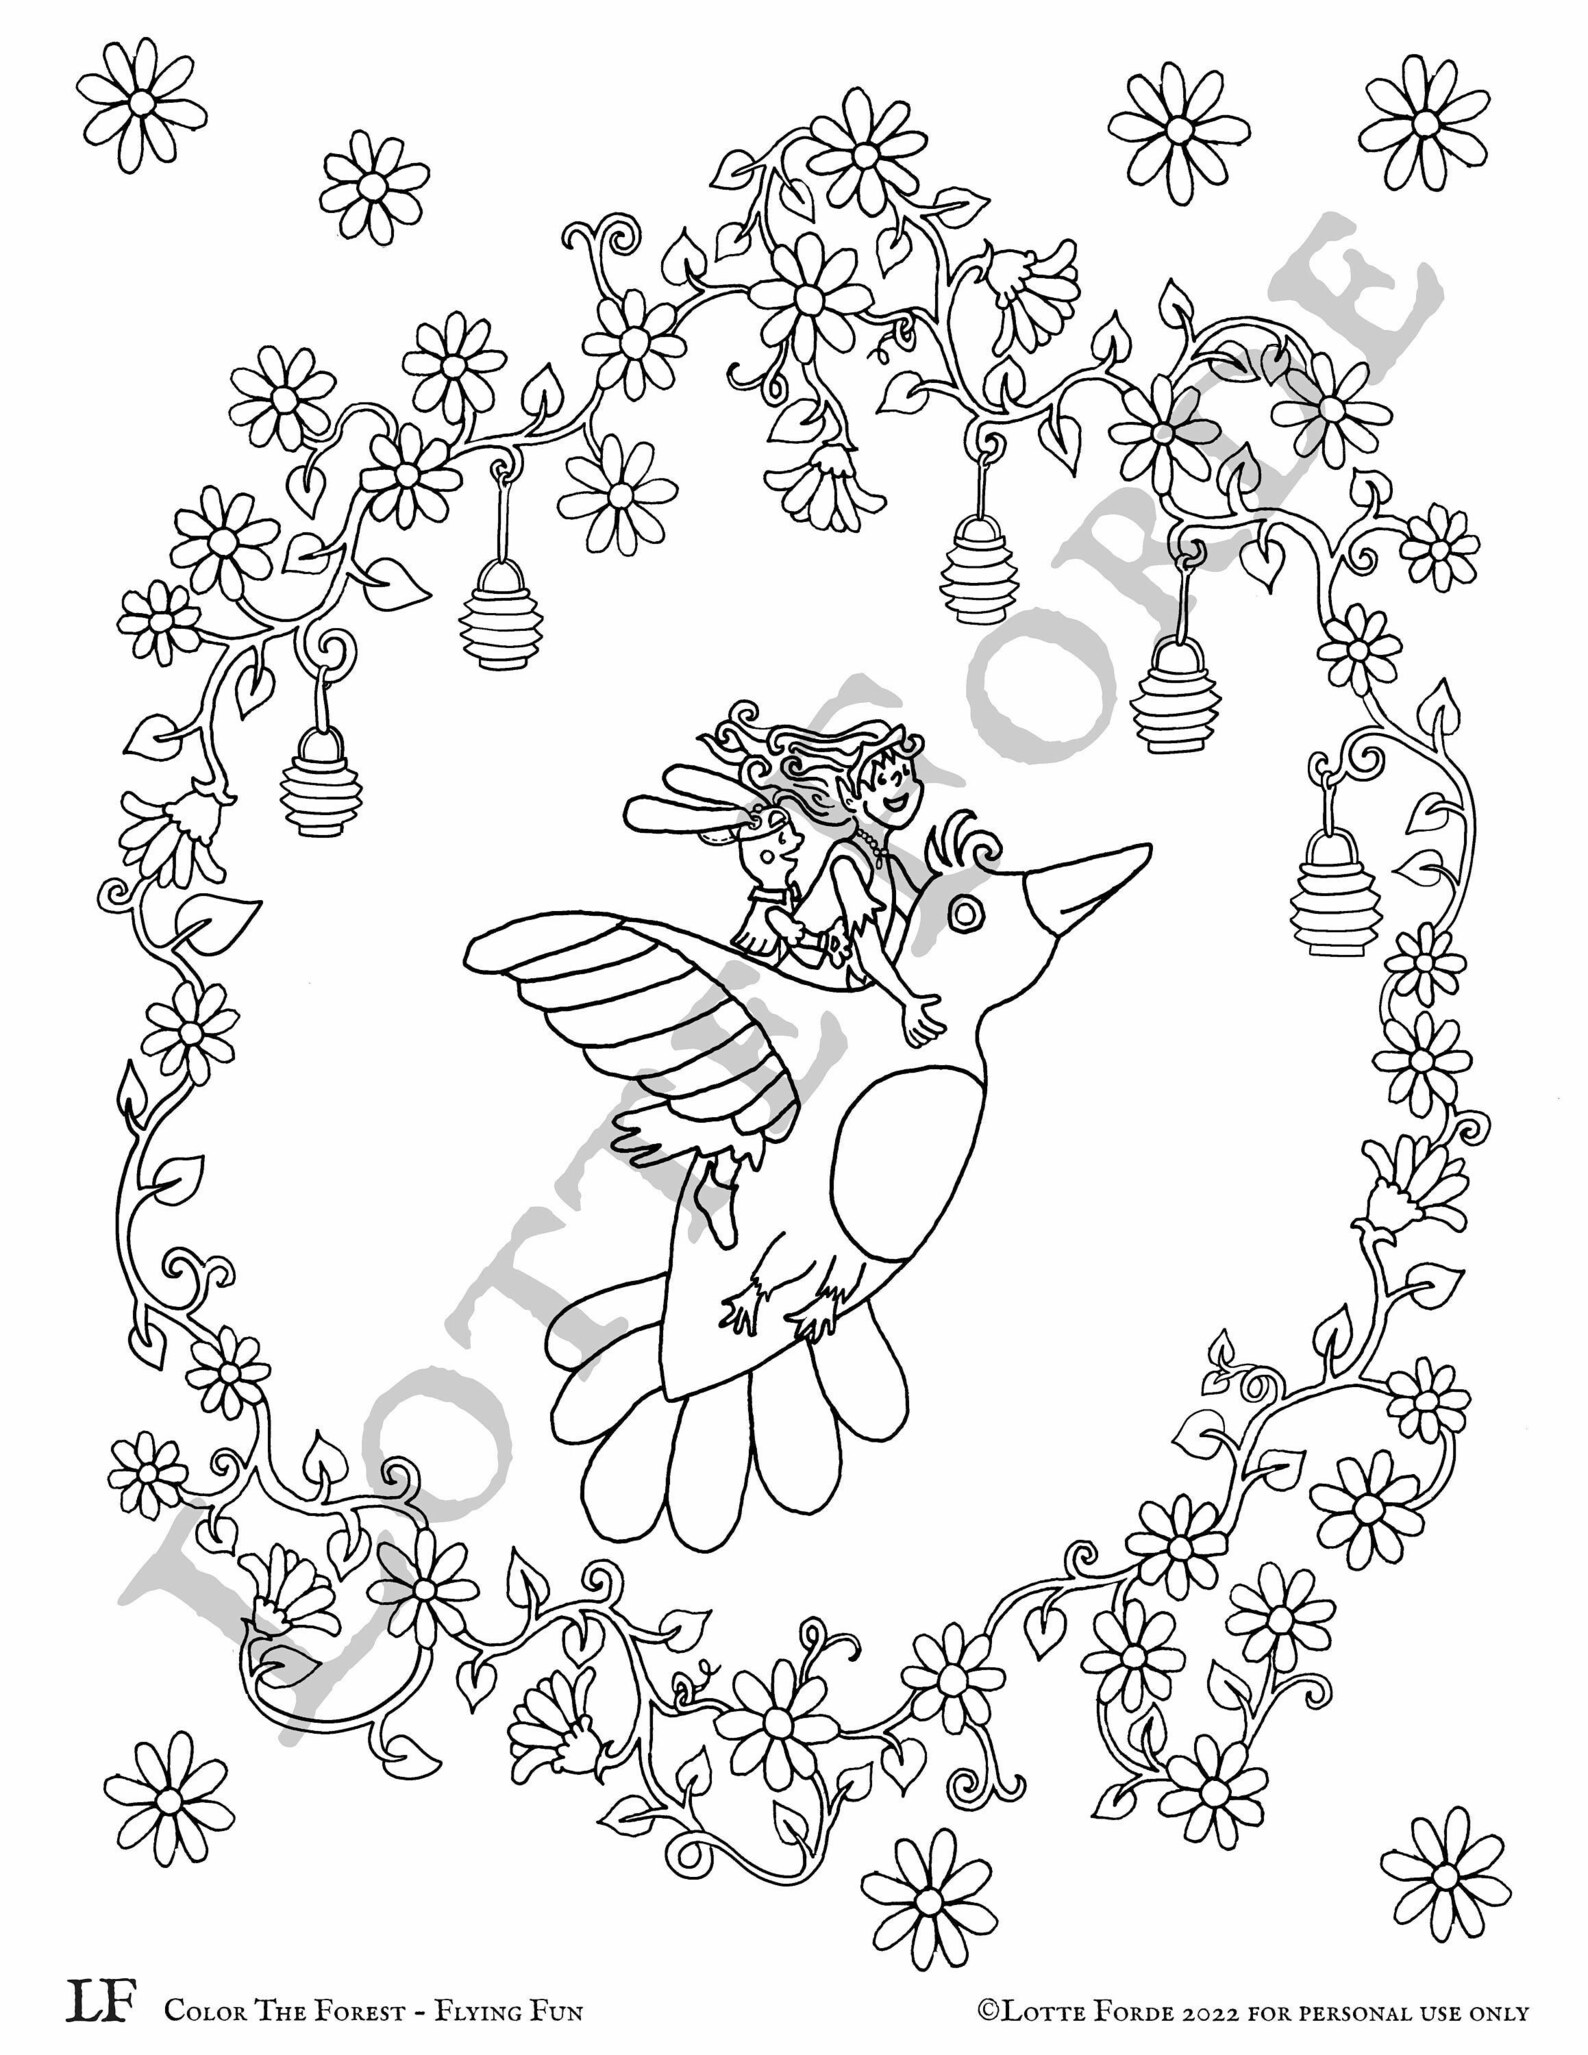 Lotte Forde Color the Forest Coloring Book Page 55 Flying Fun PDF ...